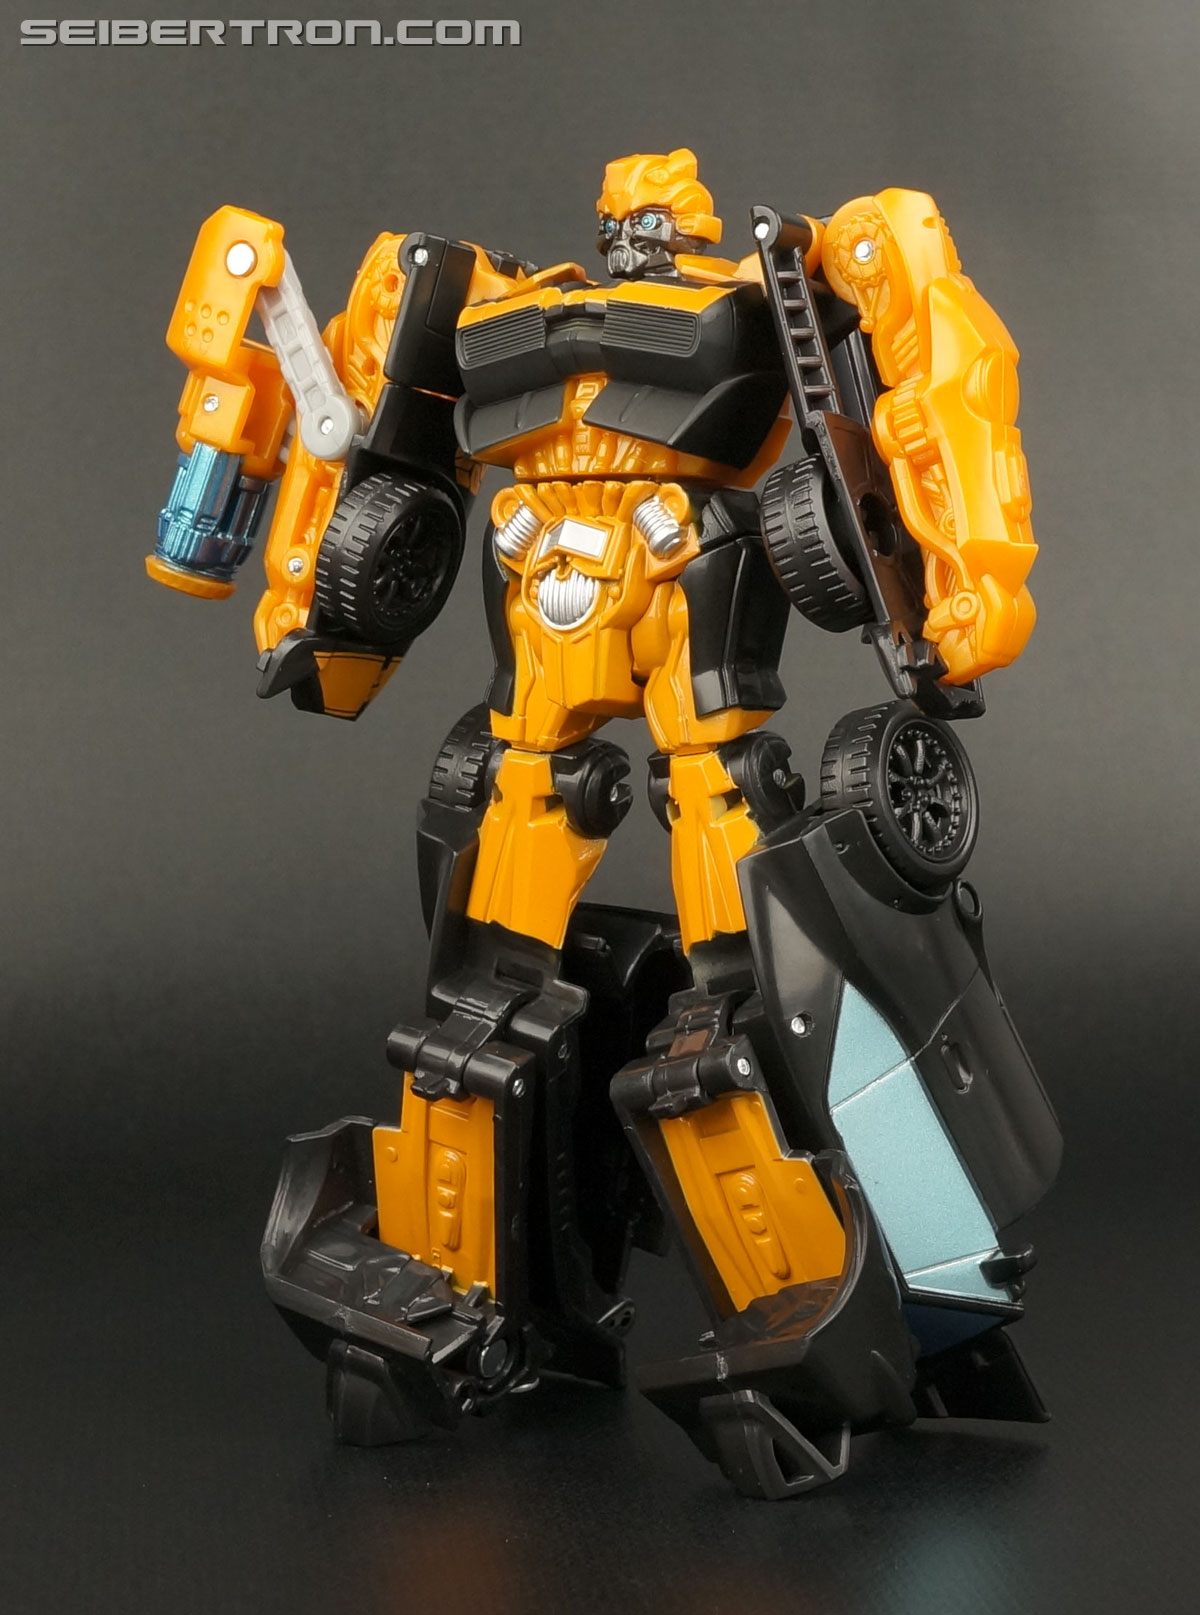 Transformers Age of Extinction: Robots In Disguise High Octane Bumblebee (Image #58 of 98)